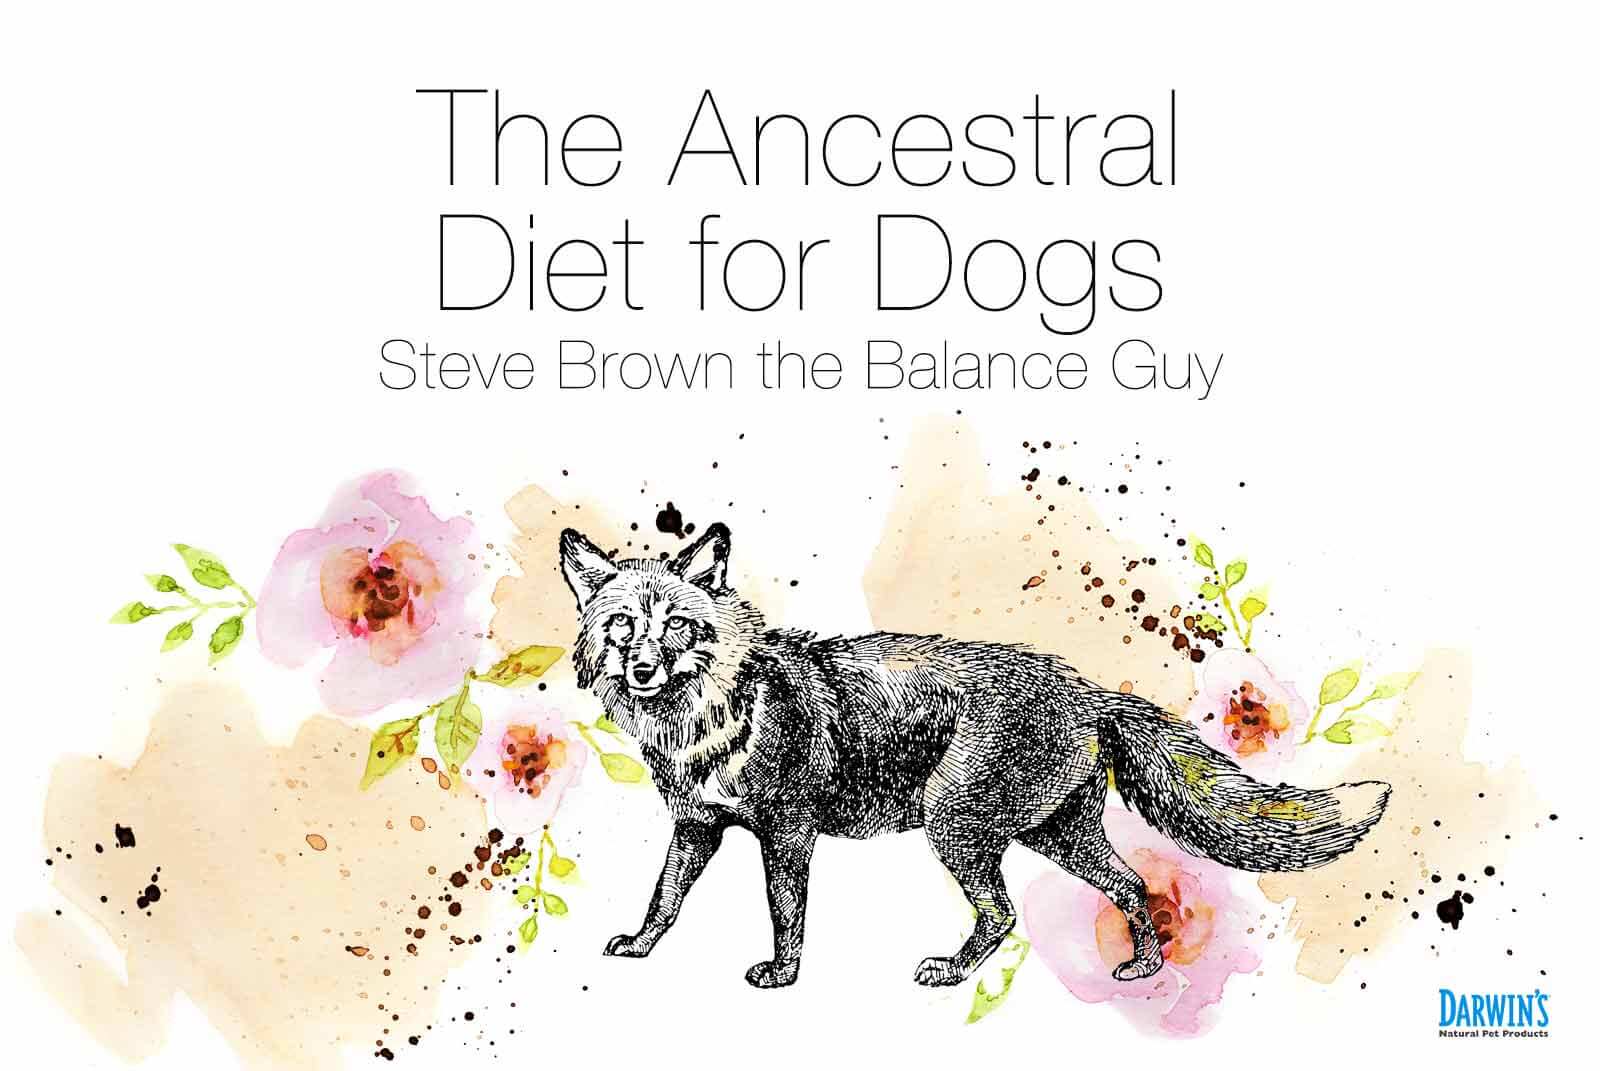 The Ancestral Diet for Dogs